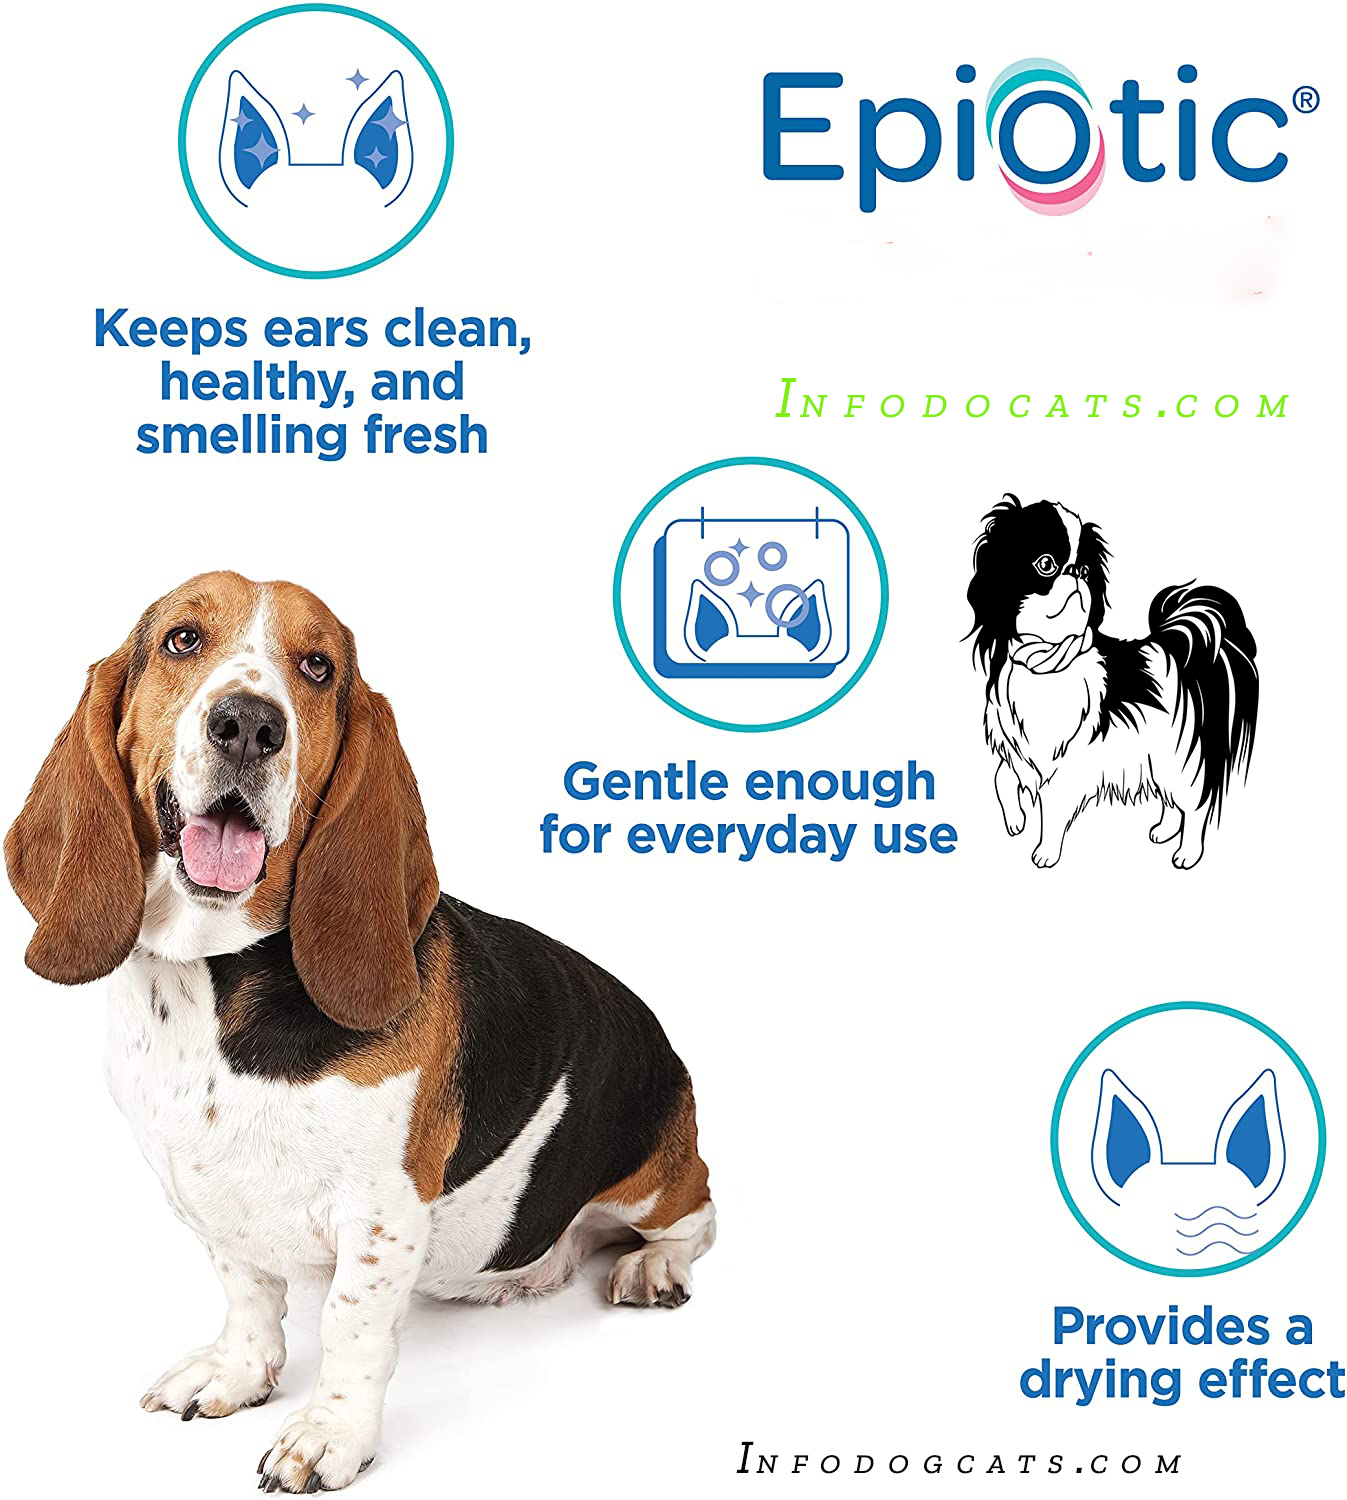 Virbac EPIOTIC Advanced Ear Cleanser, Vet-Recommended For Dogs and Cats,